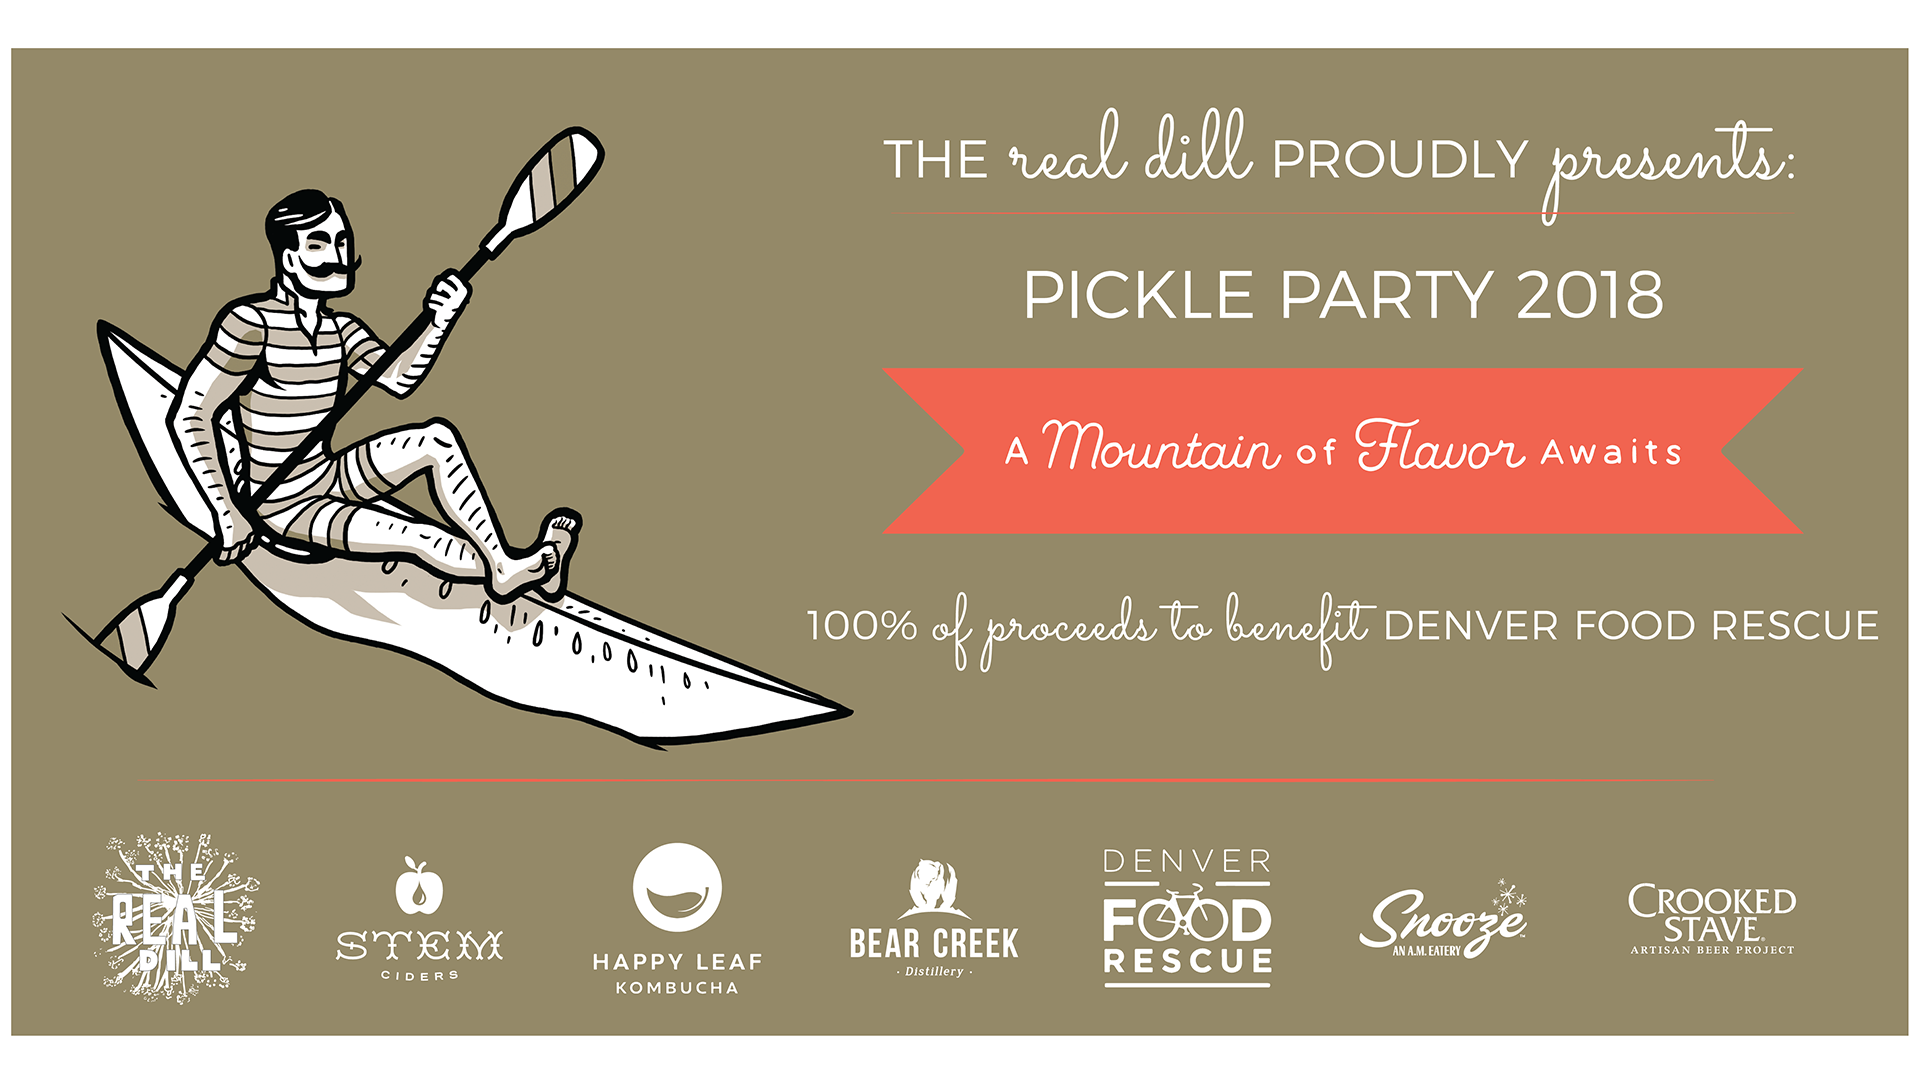 Pickle Party 2018: A Mountain of Flavor Awaits